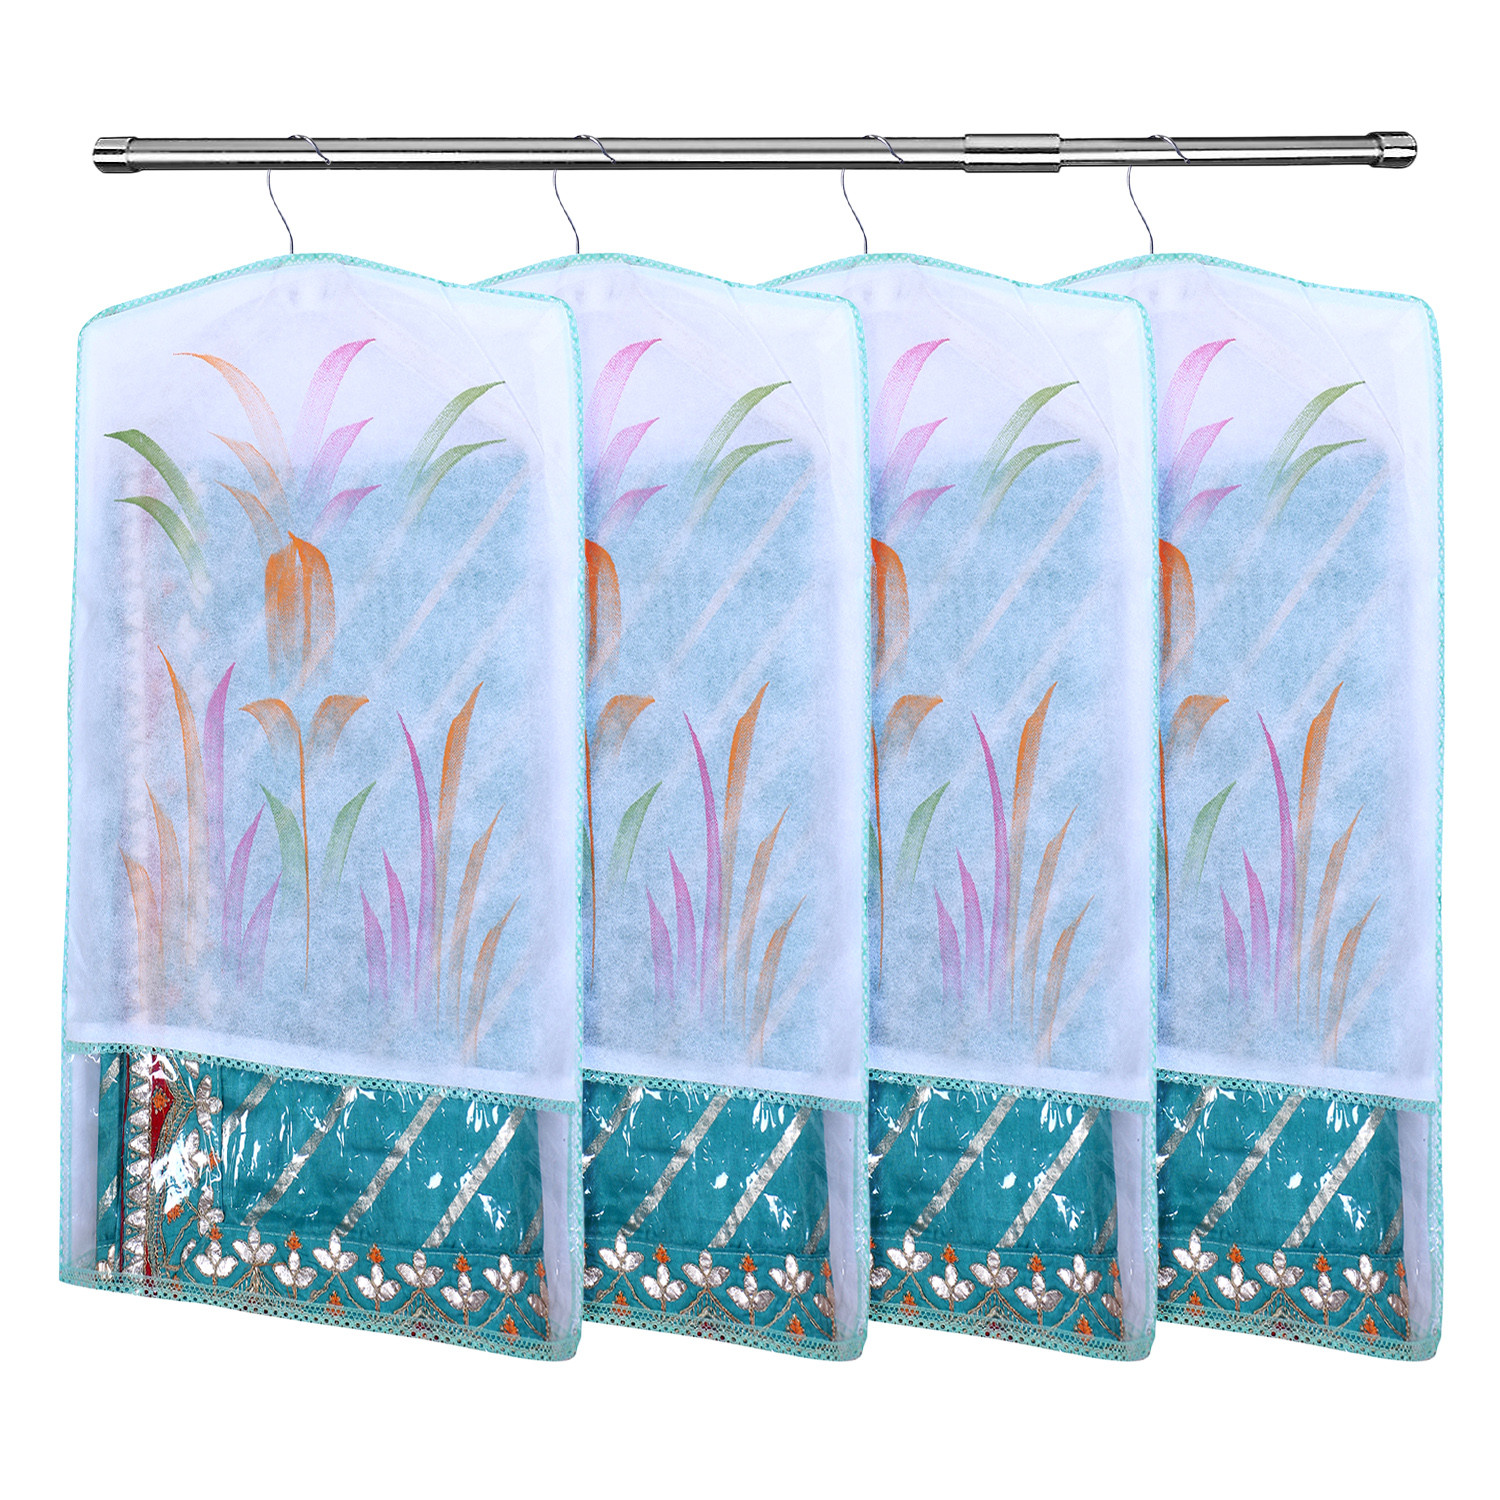 Kuber Industries Hanging Saree Cover | Brush Painting Pattern Saree Cover | Non-Woven Saree Covers for Home | Saree Cover with Small Transparent view |  Green